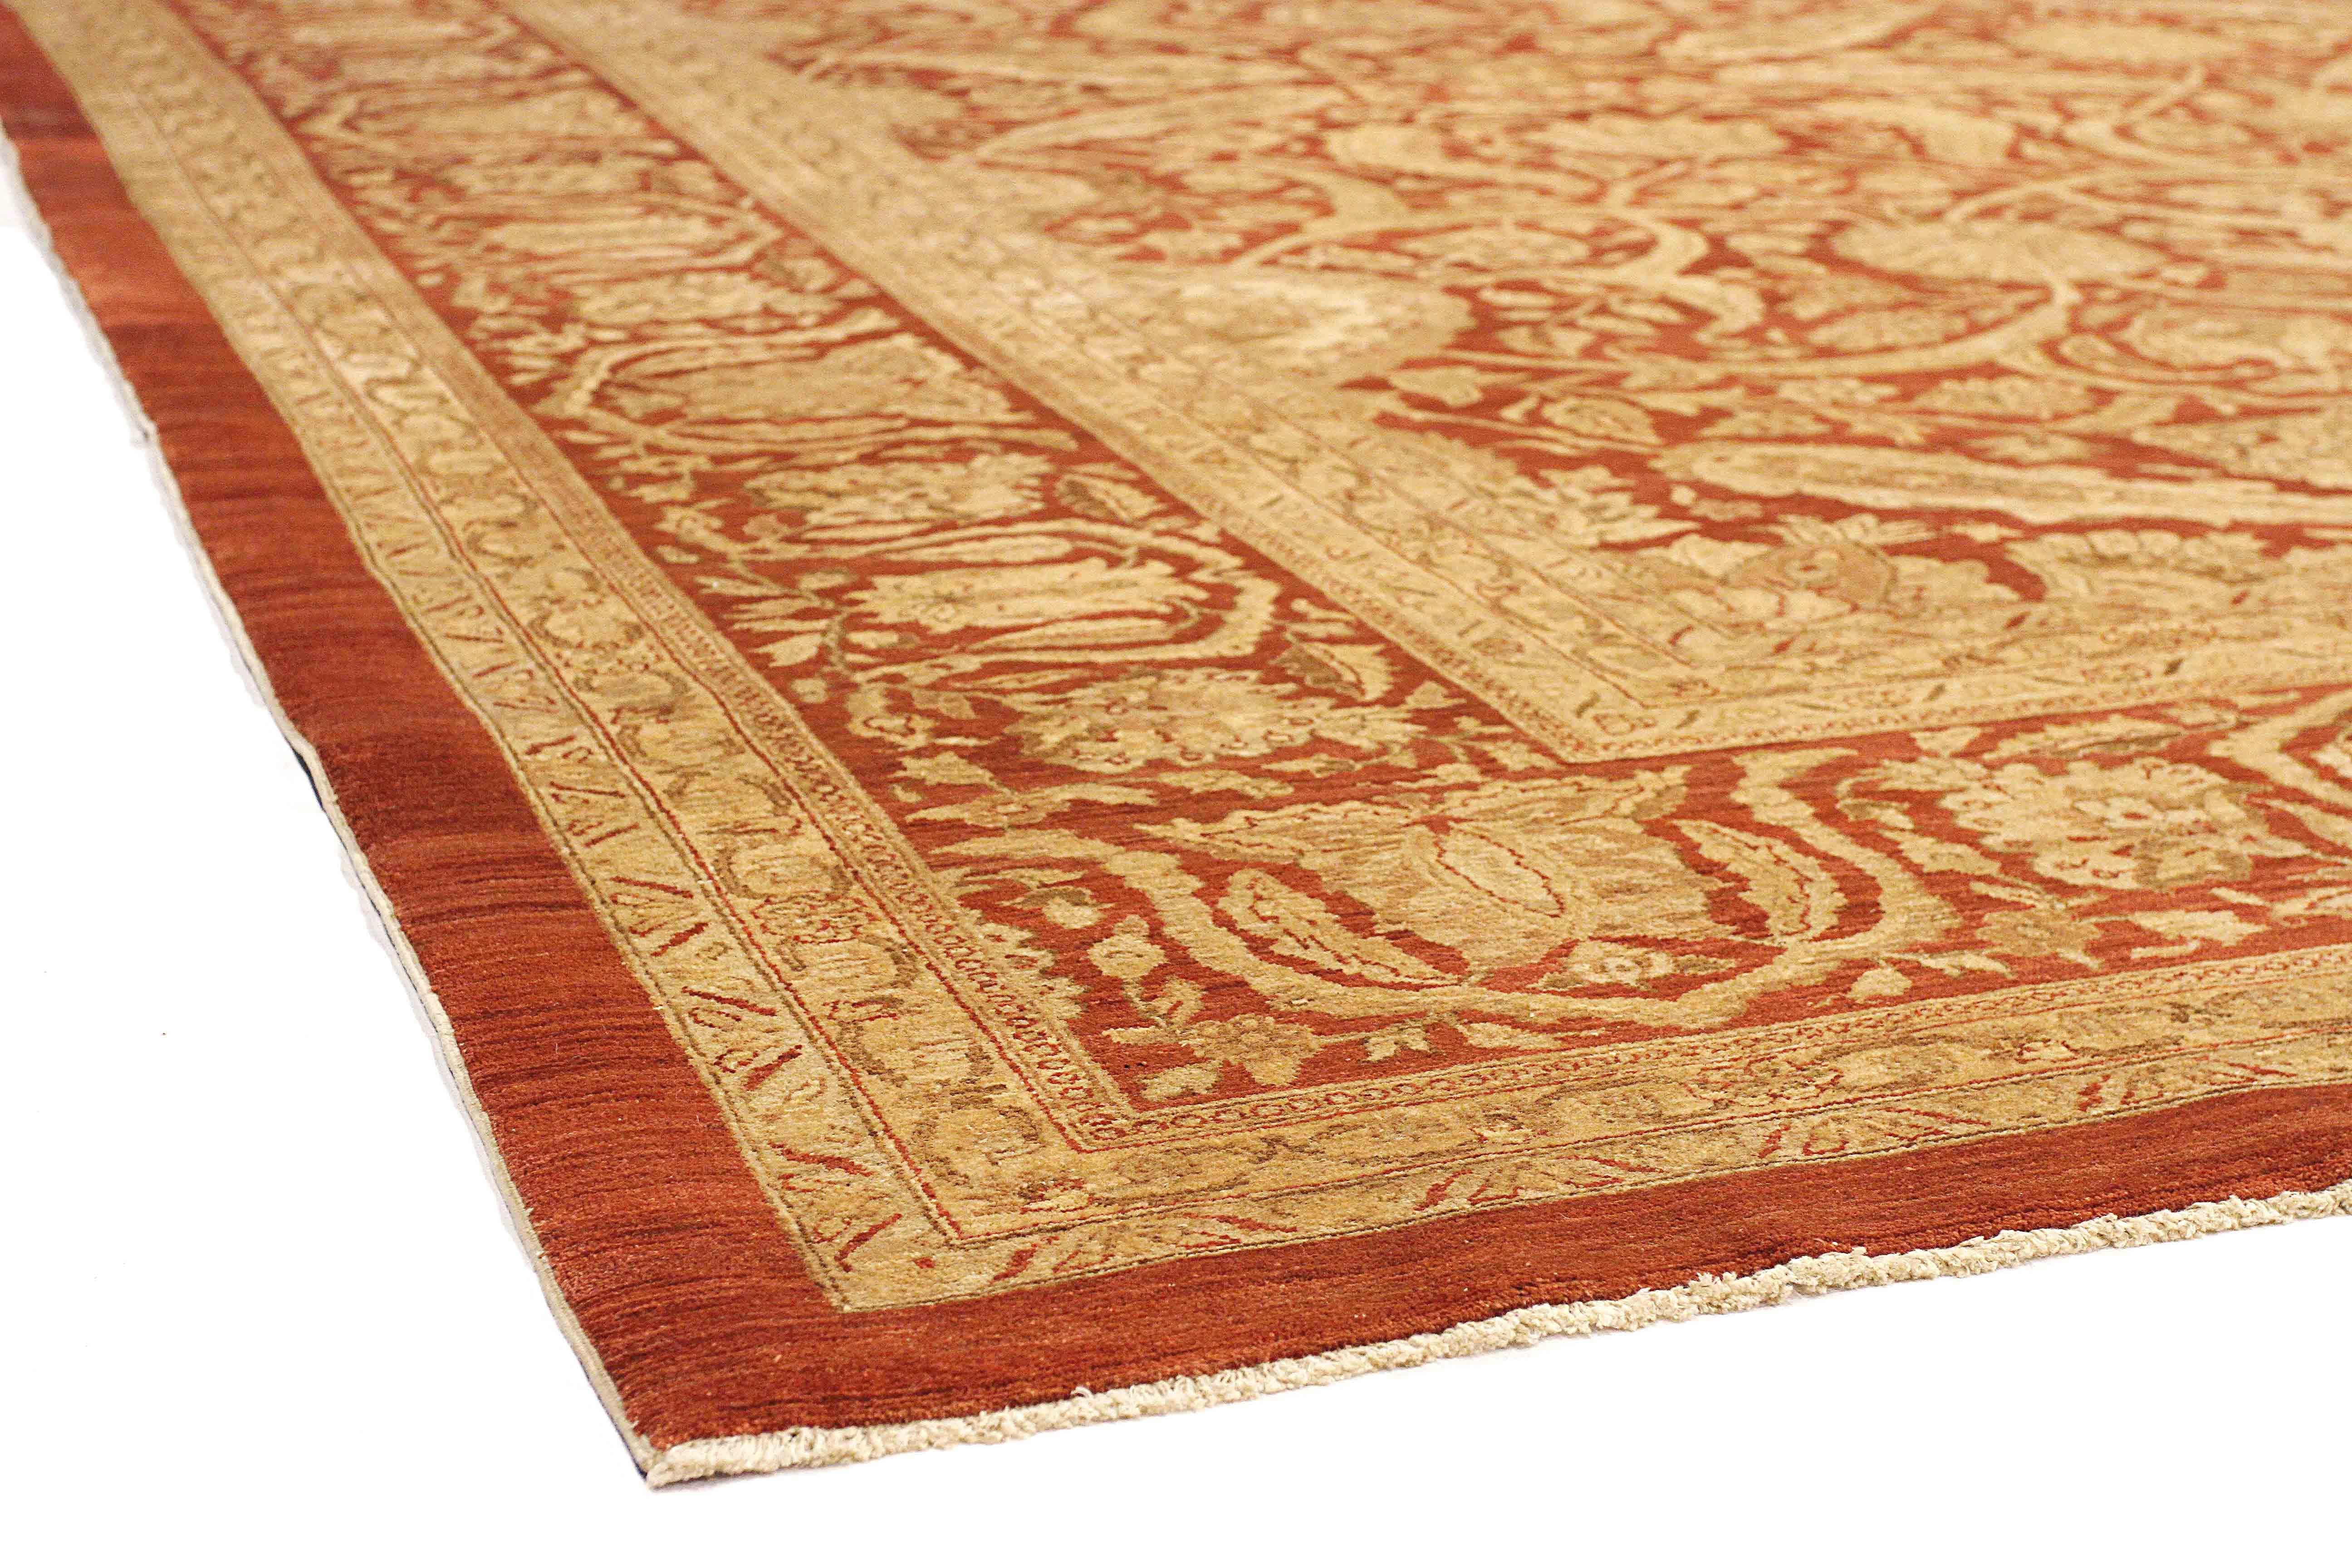 Contemporary Persian Tabriz Rug with Beige and Ivory Flower Motifs on Red Field In New Condition For Sale In Dallas, TX